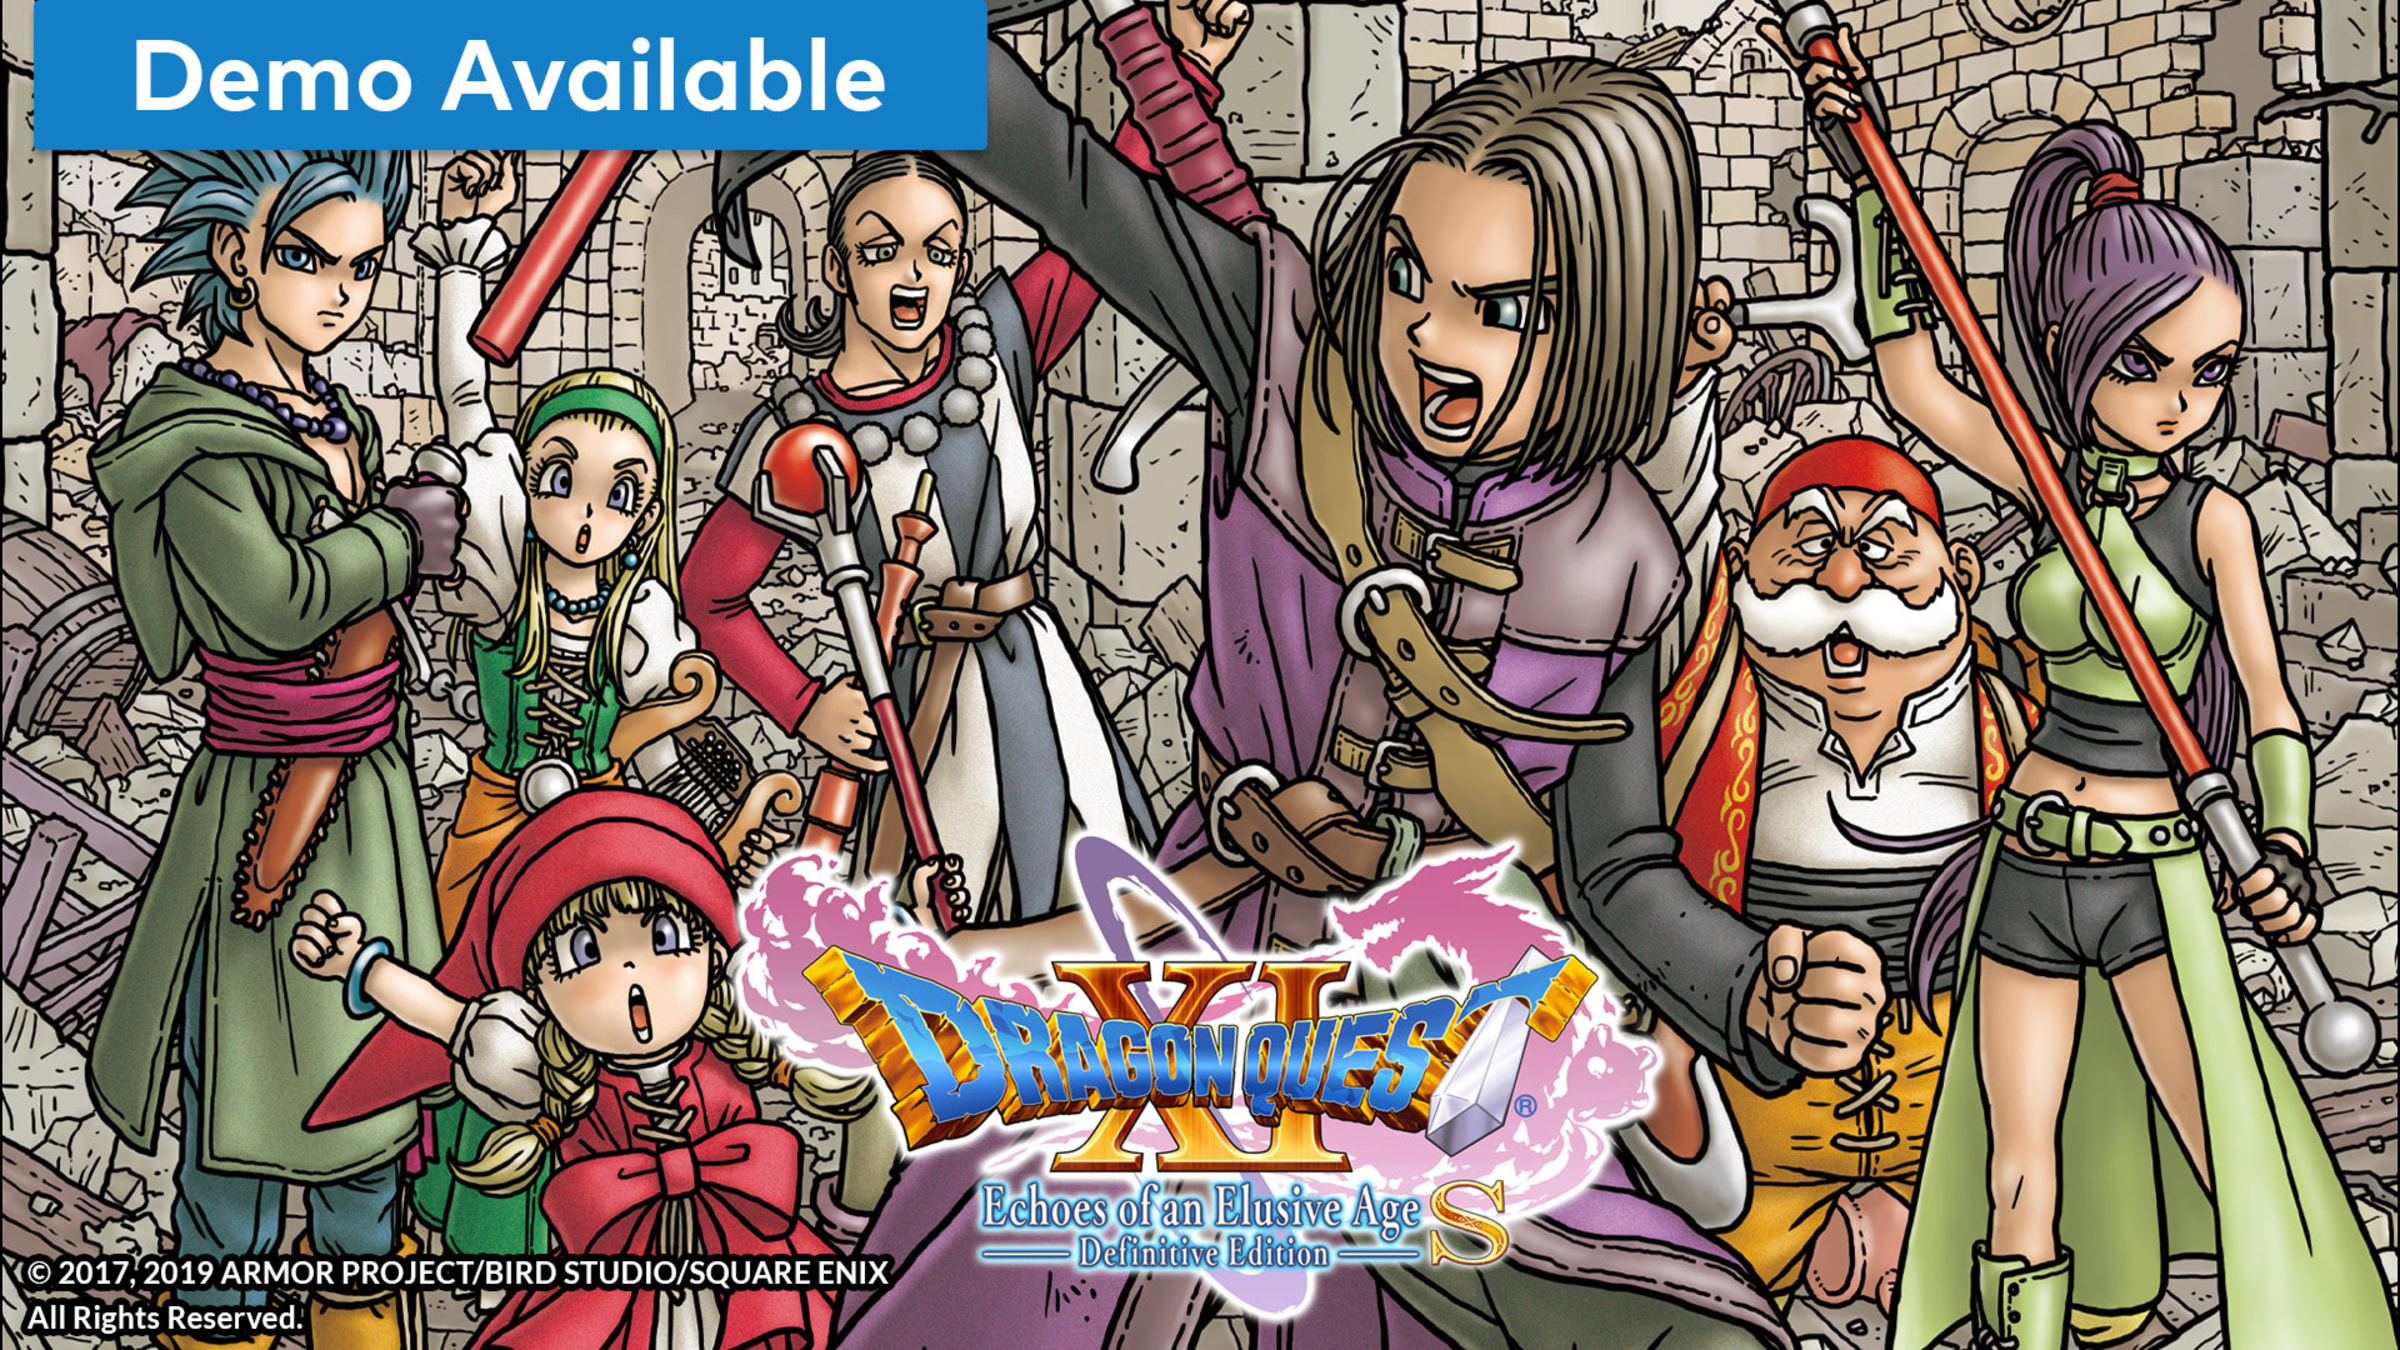 dragon-quest-xi-s-echoes-of-an-elusive-age-definitive-edition-for